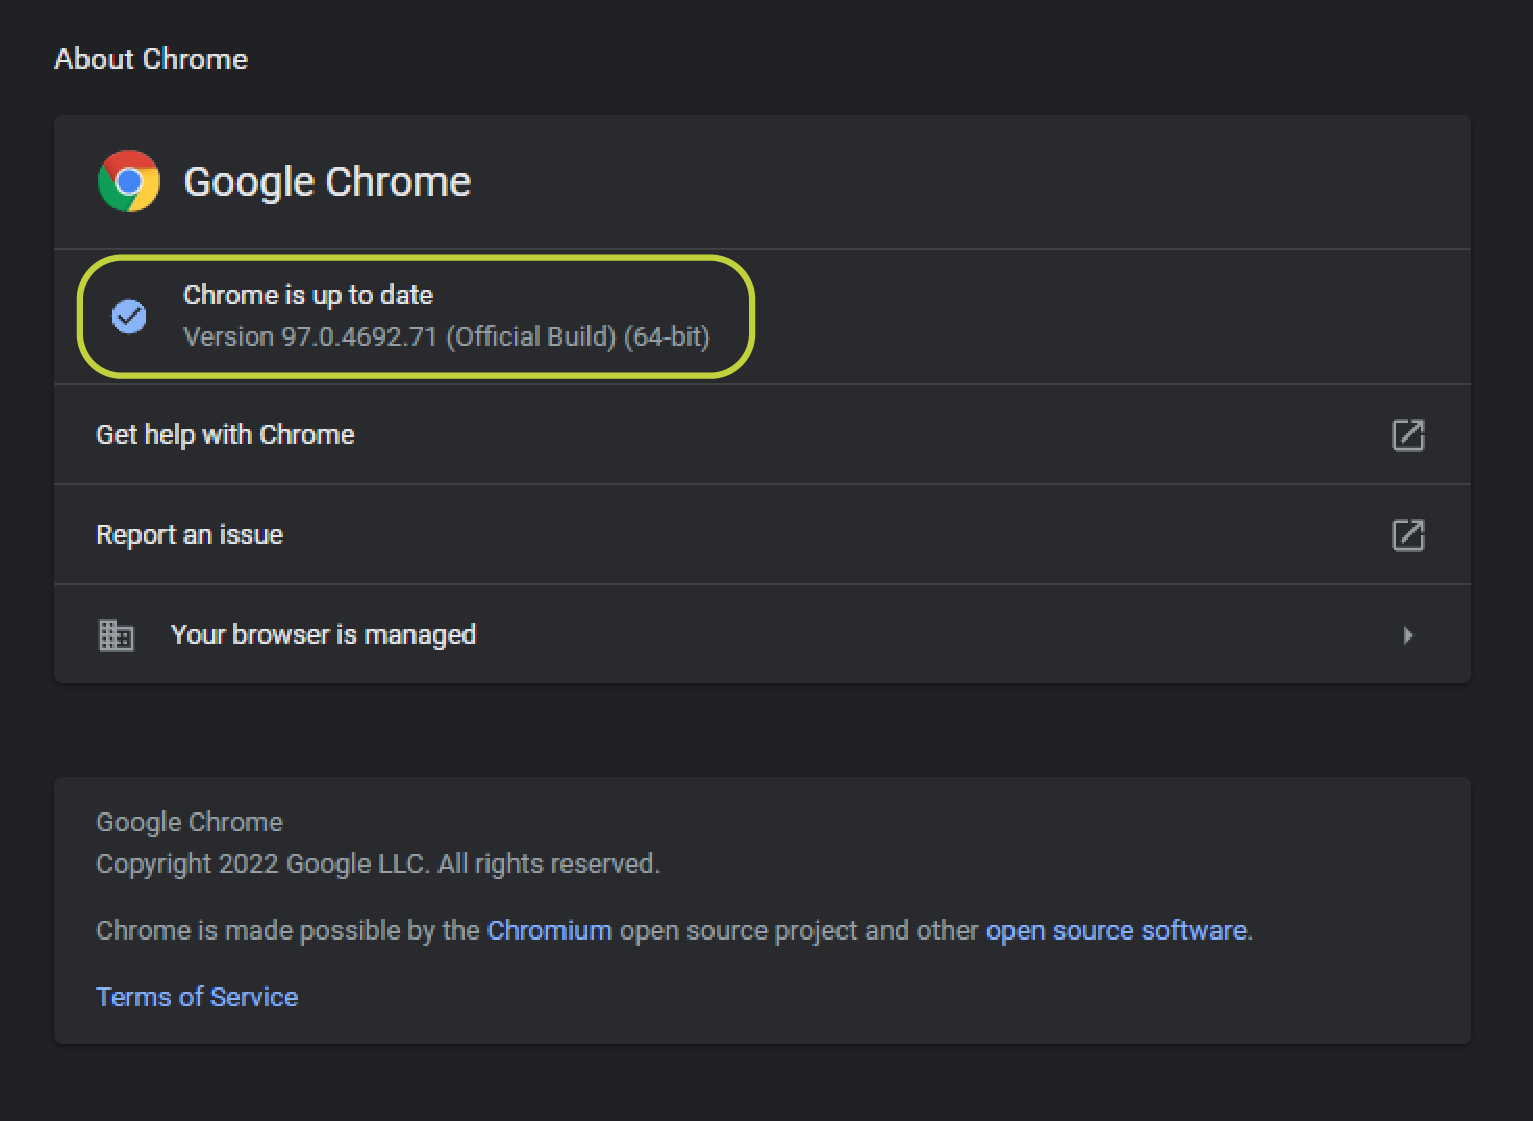 Check the status of your Google Chrome browser.